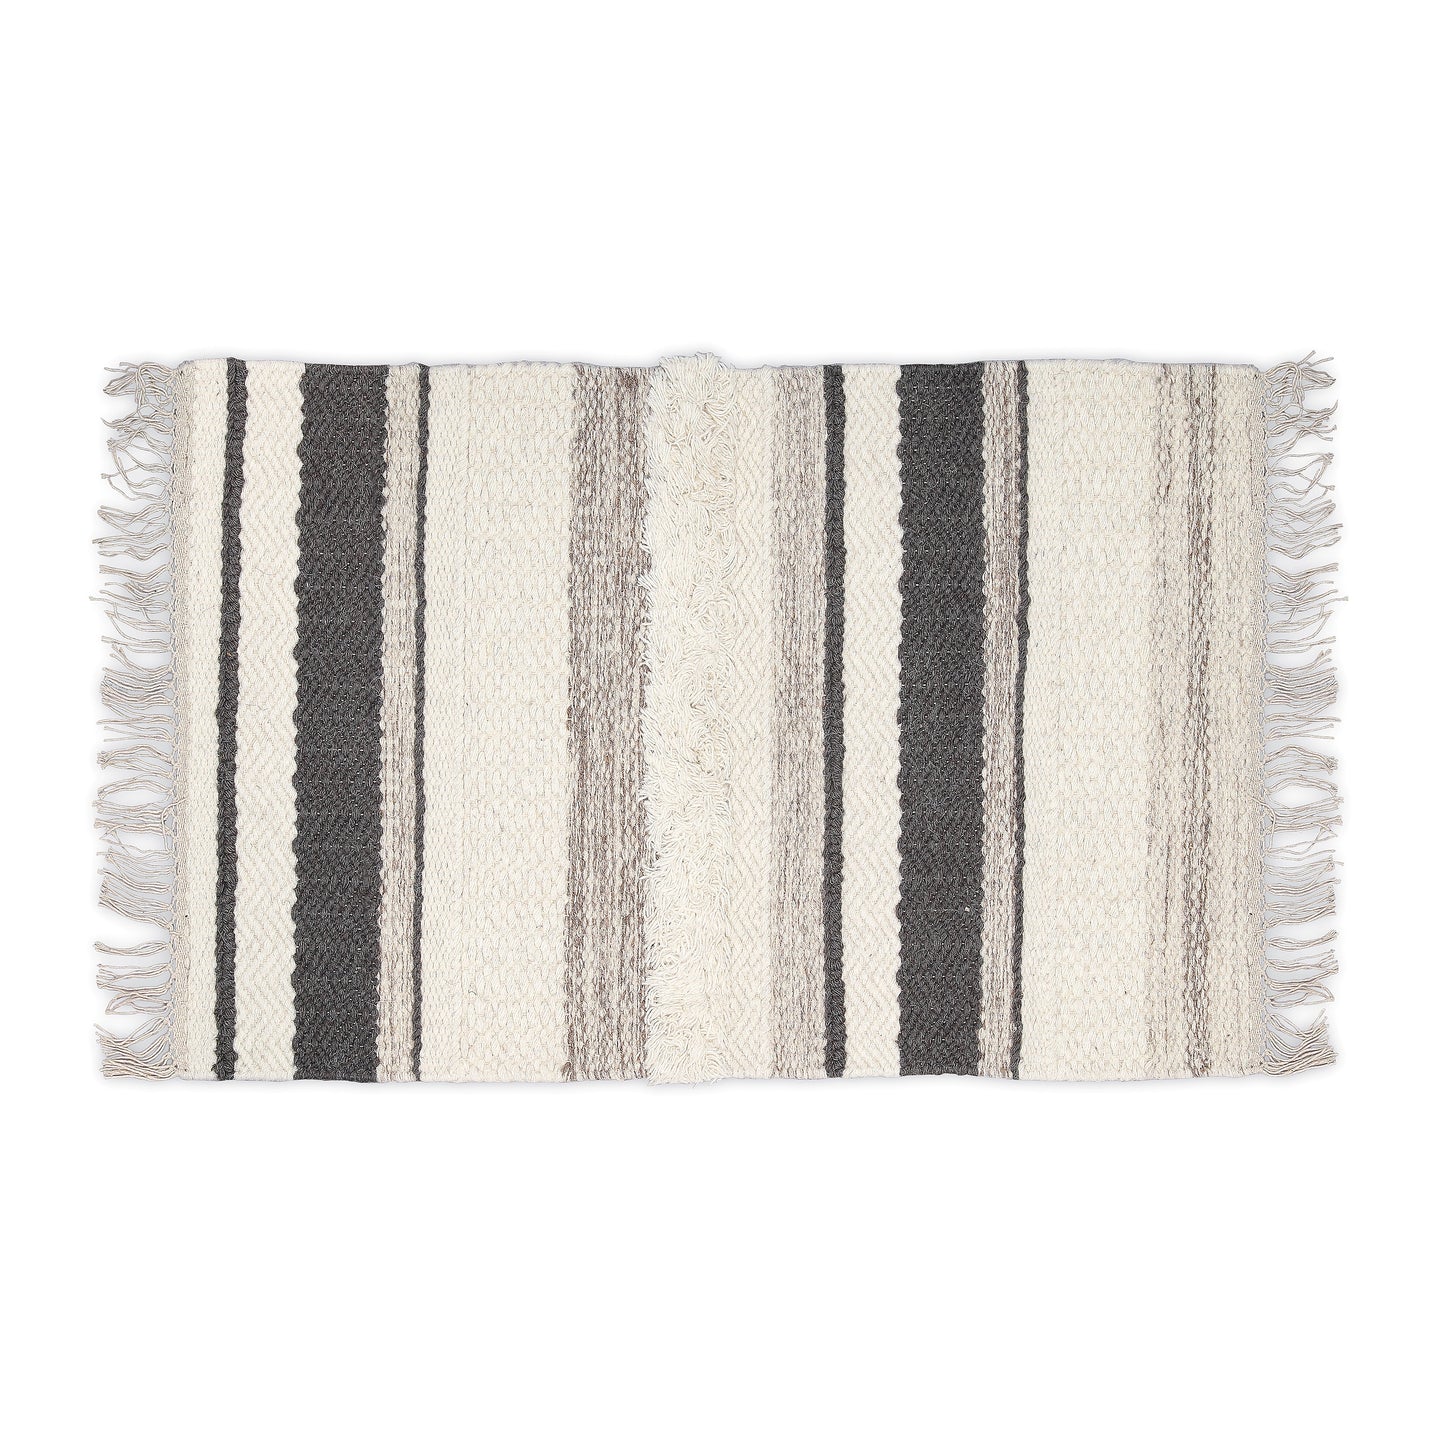 Hand Woven Wool Area Rug  Woven Gray White Stripes 1216